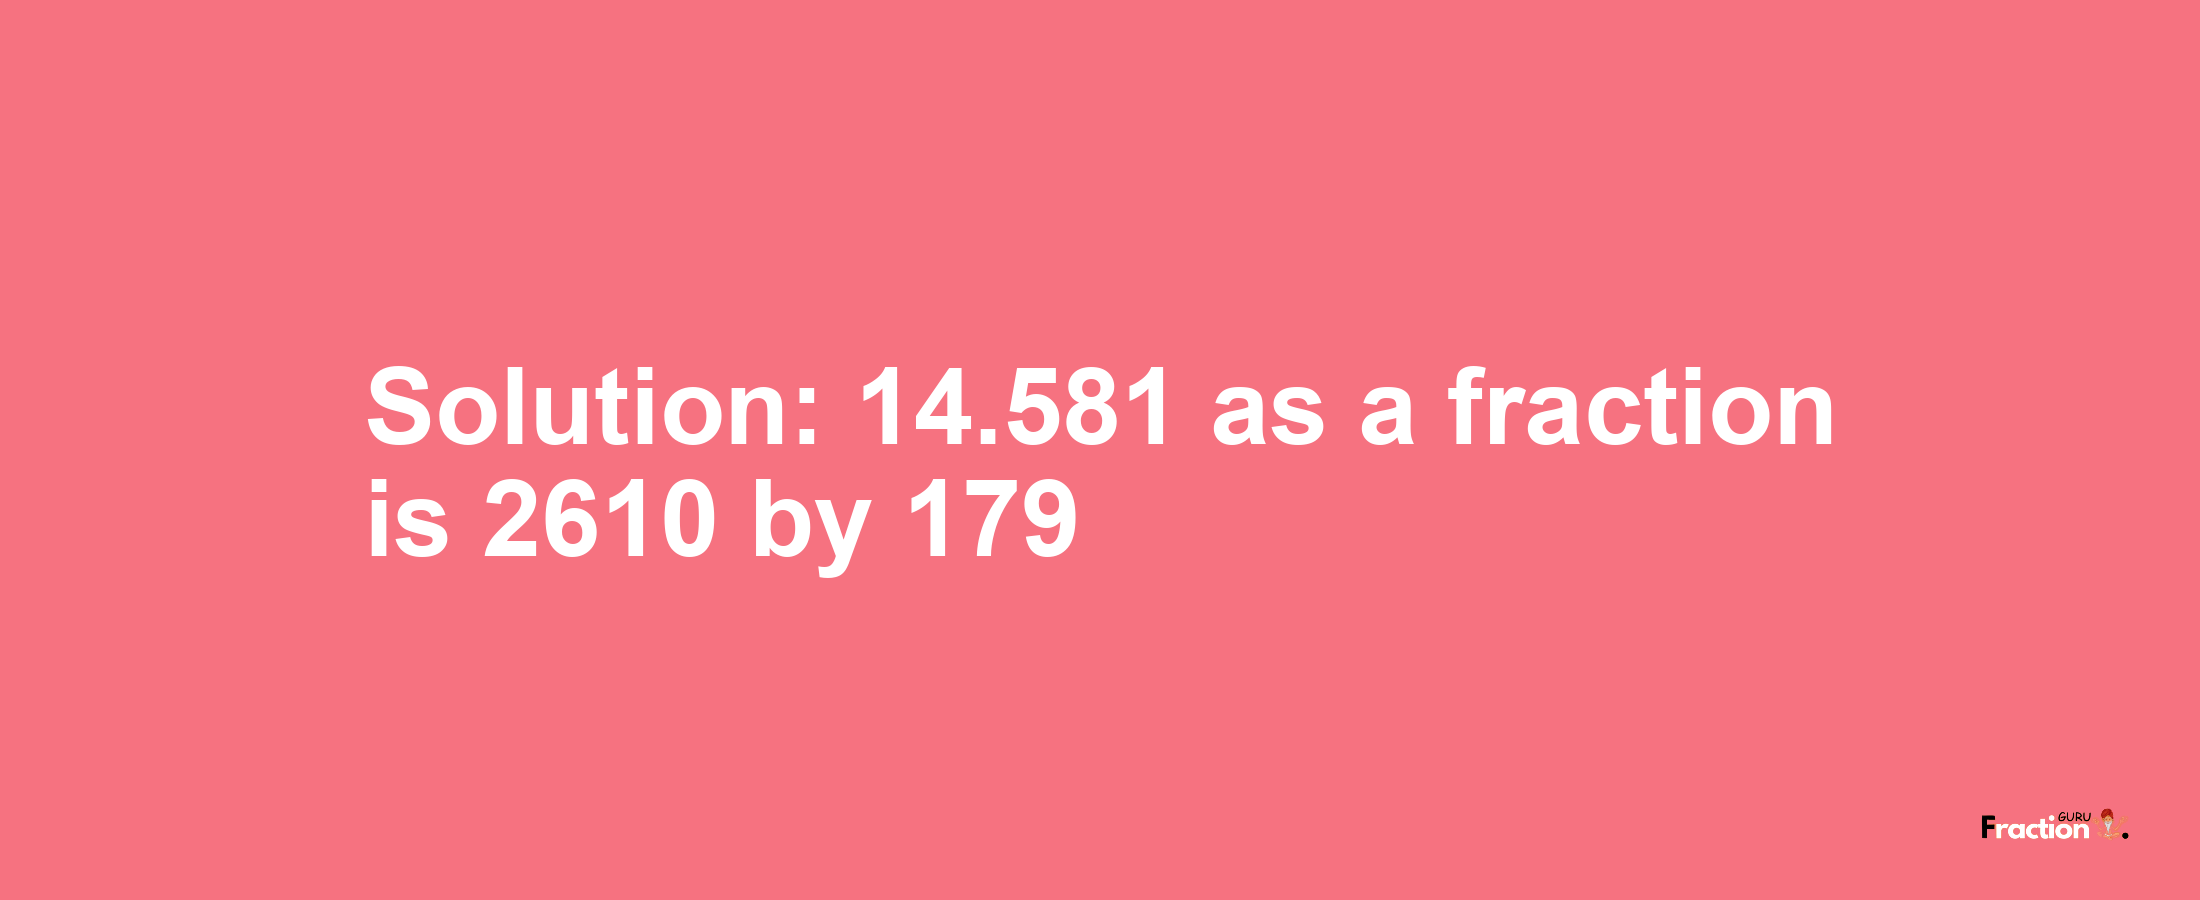 Solution:14.581 as a fraction is 2610/179